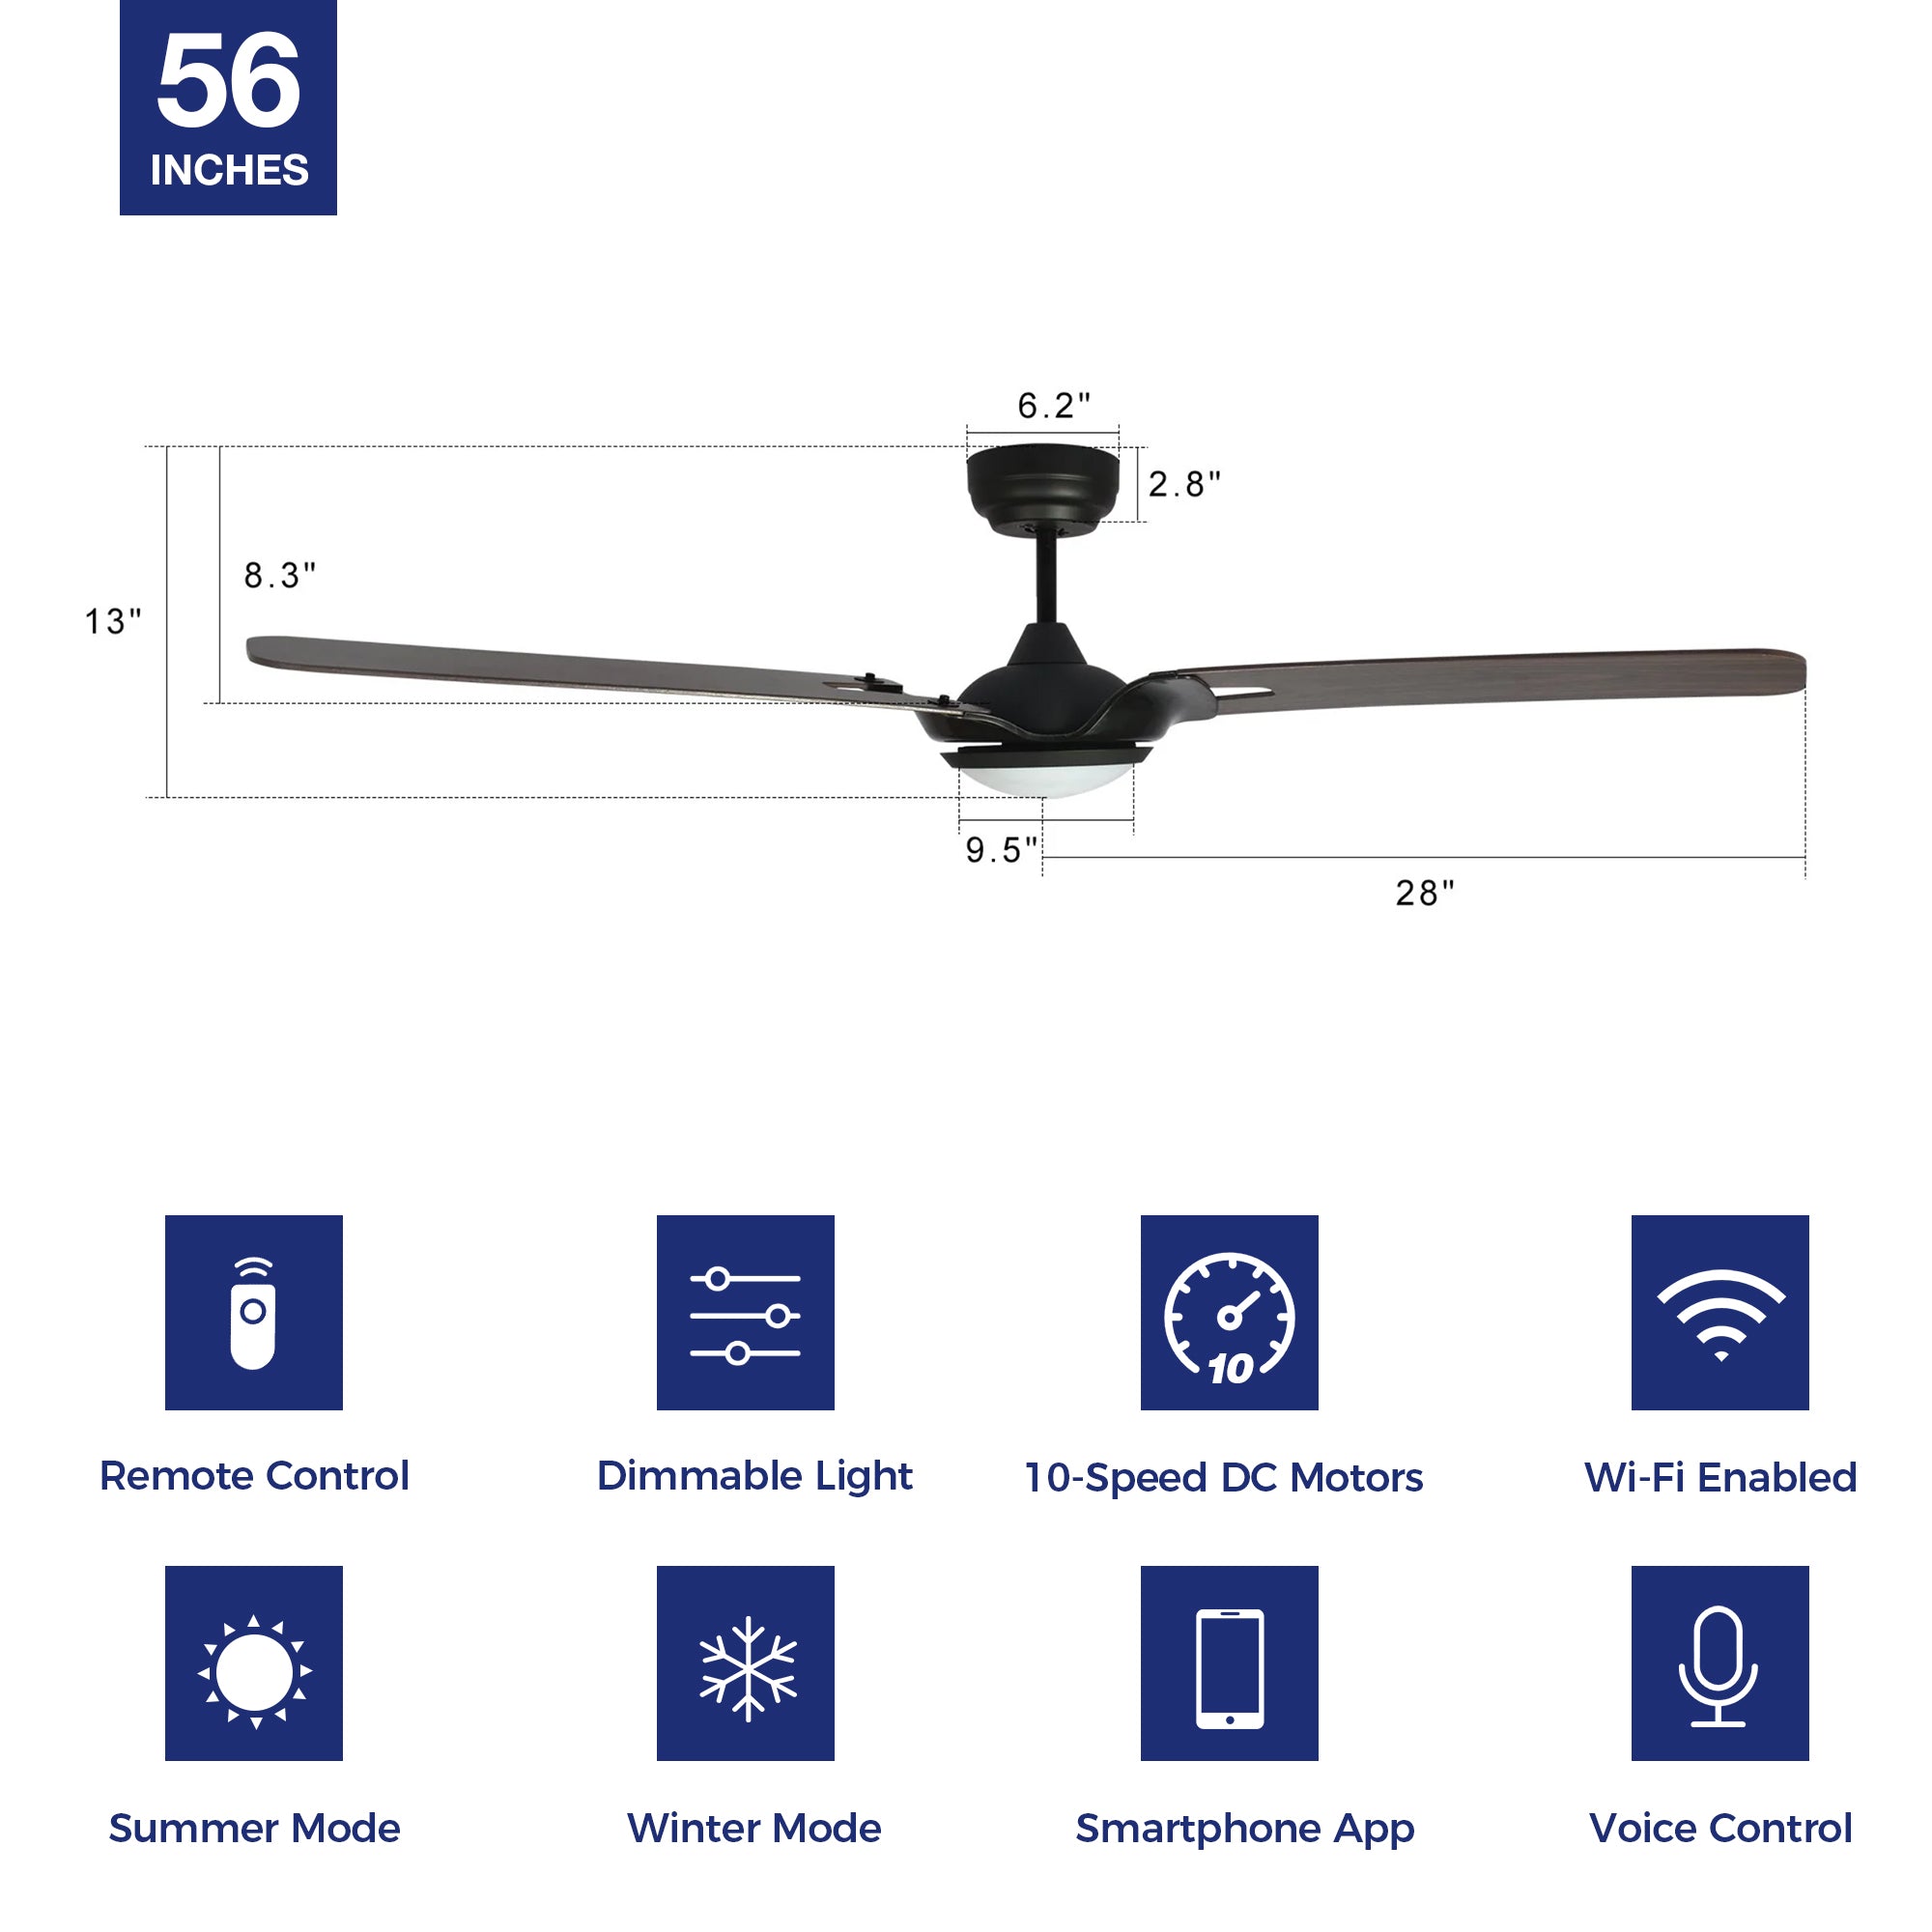 Innovator Outdoor 56&quot; Smart Ceiling Fan with LED Light Kit-Black case and wood grain Pattern Fan Blades. The fan features Remote control, Wi-Fi apps, and Voice control technology (compatible with Amazon Alexa and Google Home Assistant ) to set fan preferences. Equipped with 1962-lumen dimmable LED lights and a 10-speed DC Motor (5800CFM airflow output), it brings you cool and bright. 